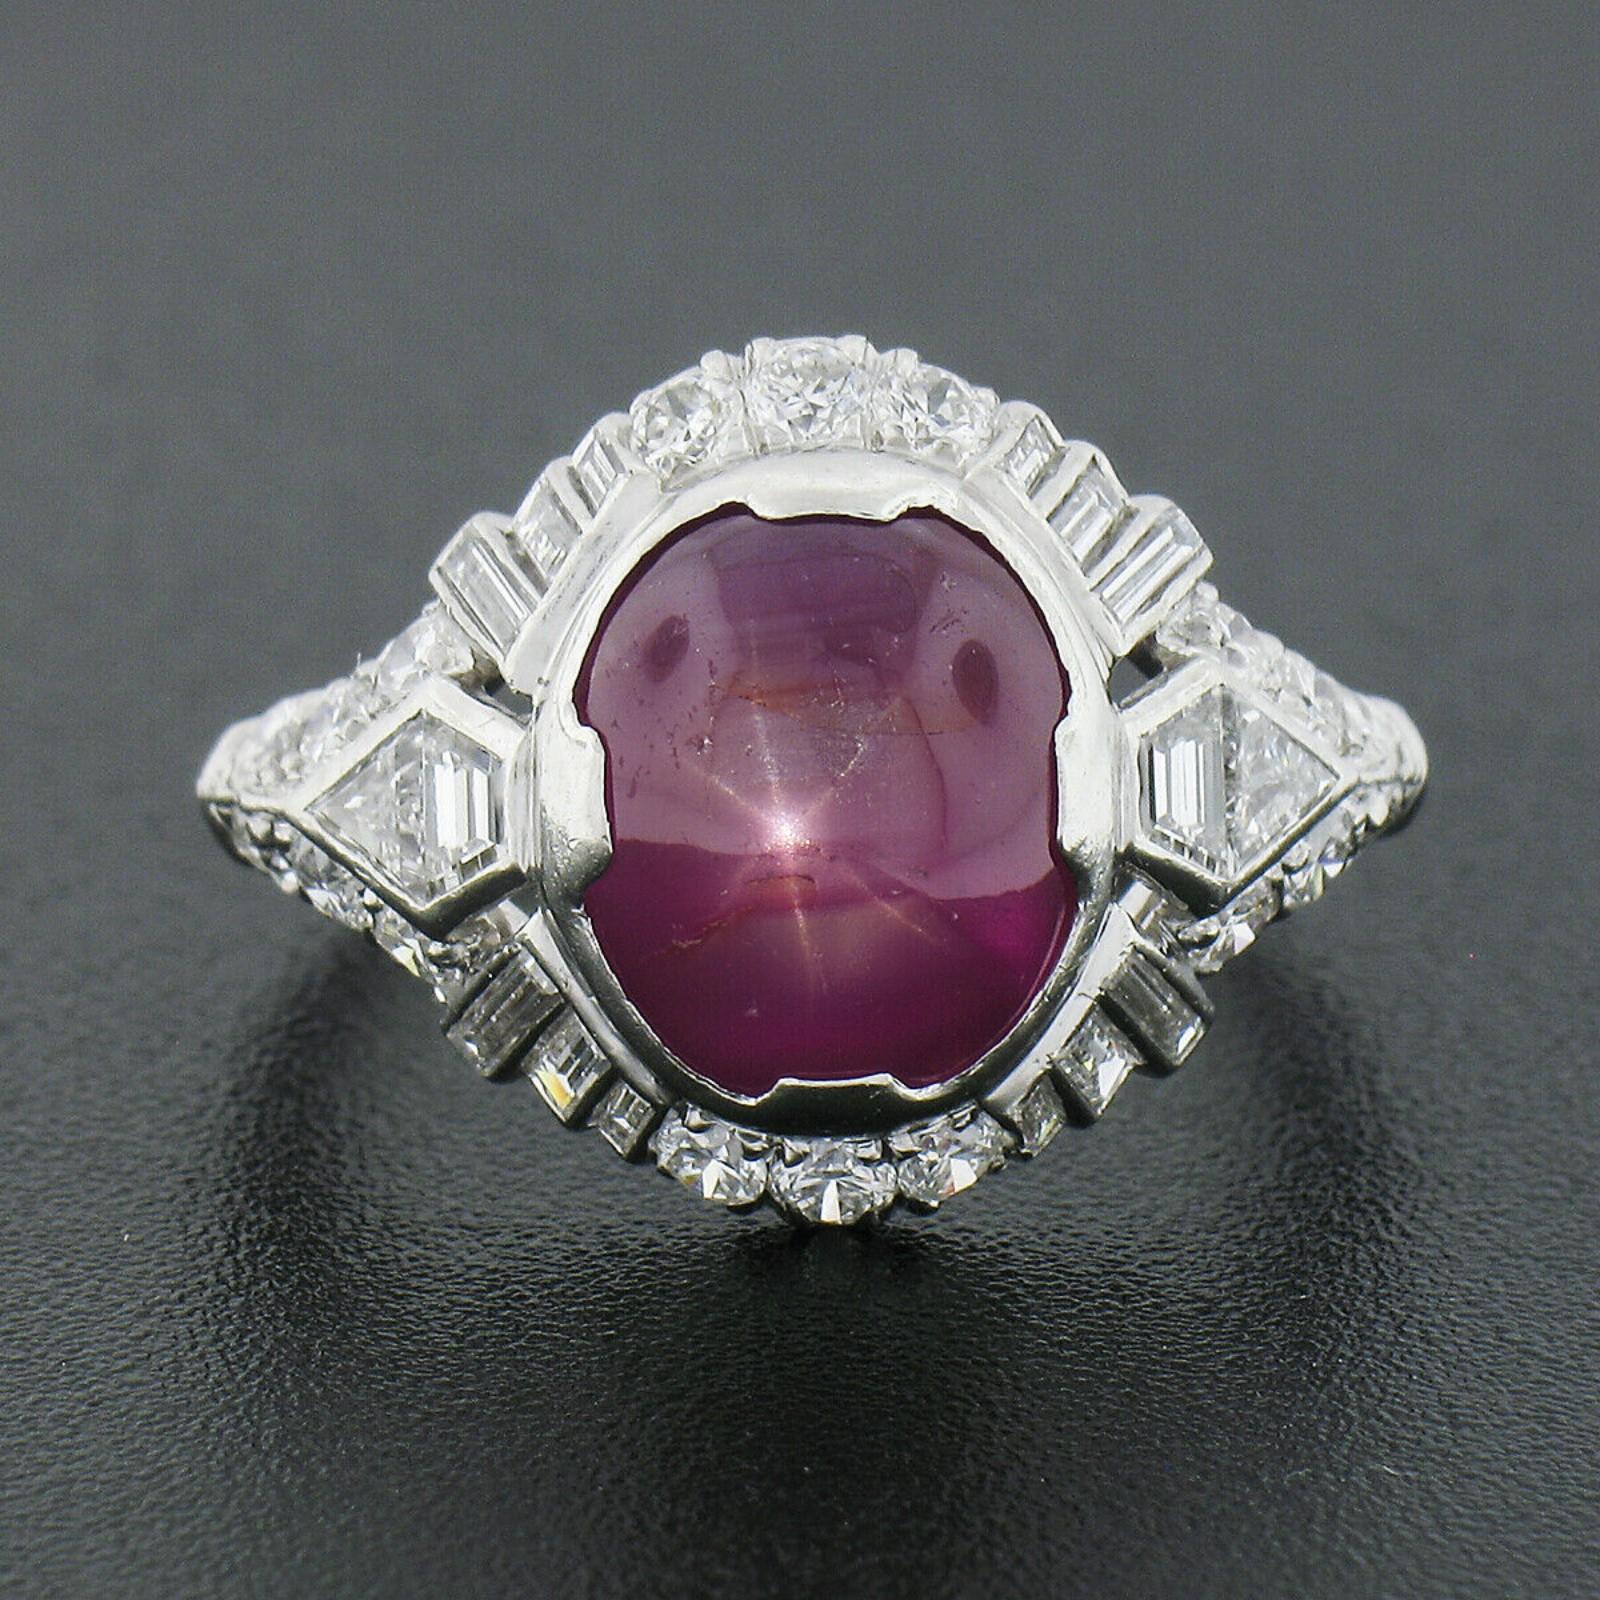 Here we have a stunning antique ring that was crafted from solid 900 platinum during the art deco period. It features a GIA certified natural star ruby stone that exhibits a gorgeous purplish-red color and a well-centered six-ray star. The ruby